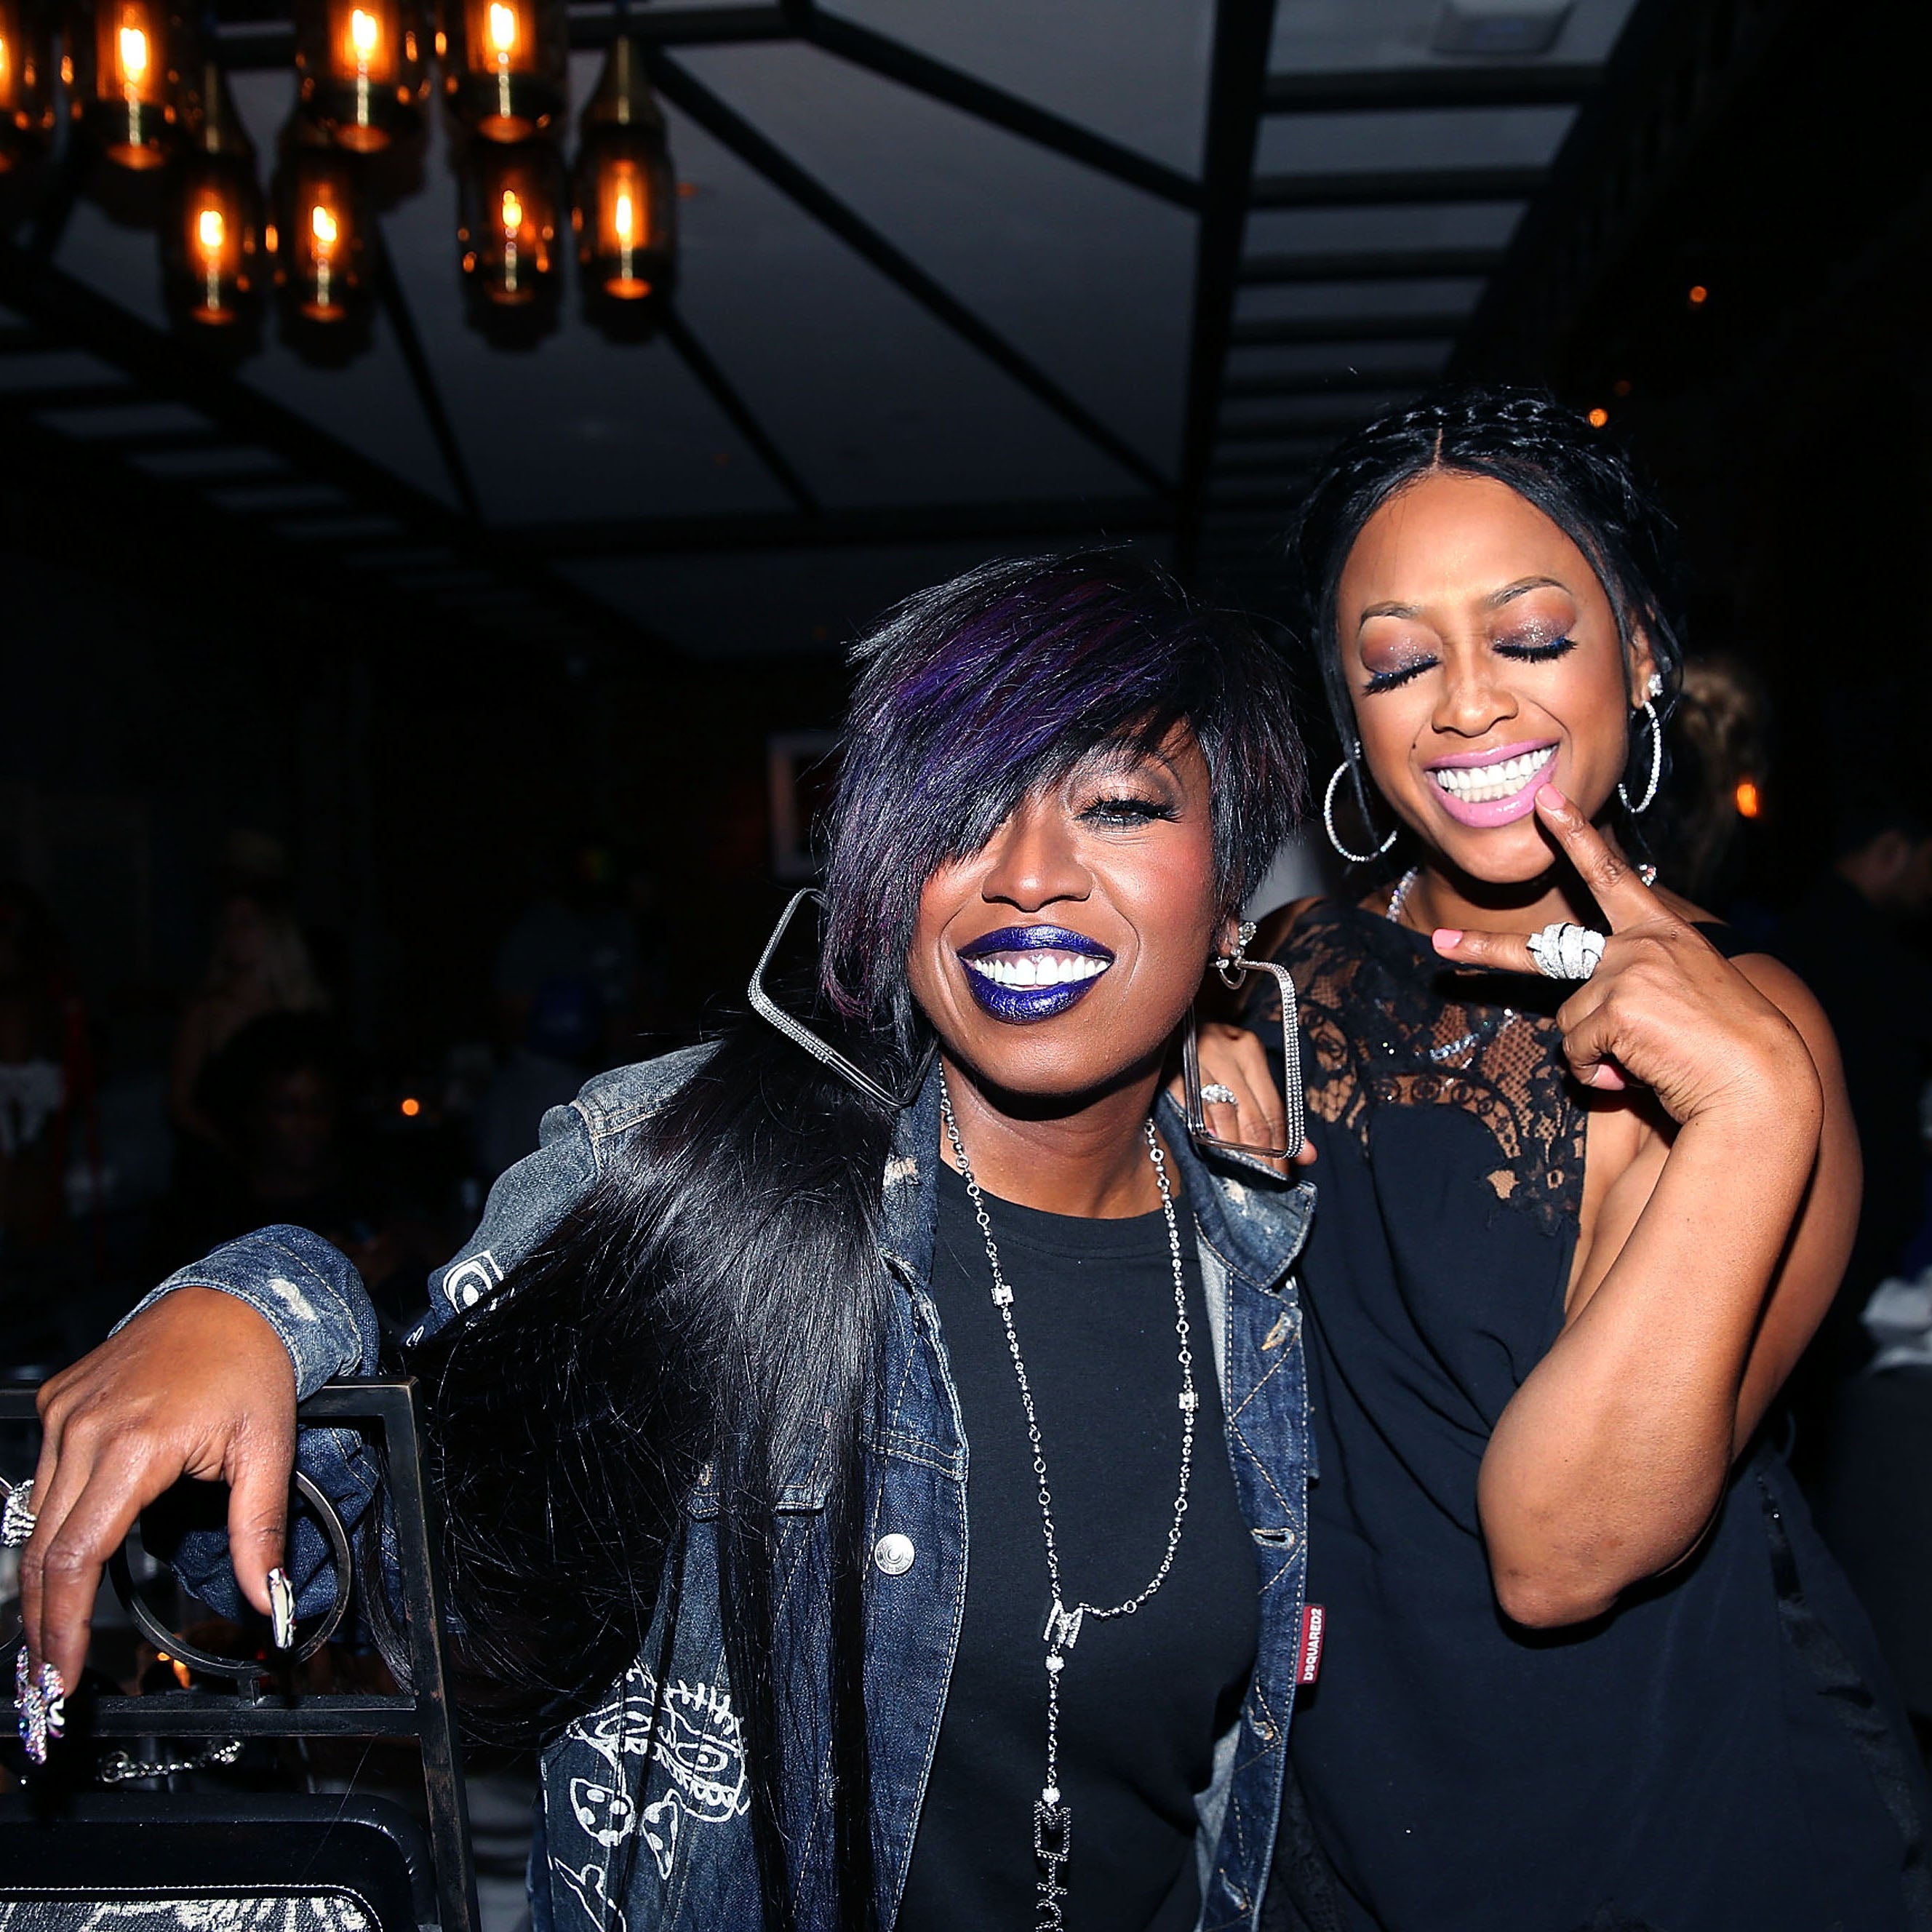 Missy Elliot, Lil' Kim, K Michelle and More!
